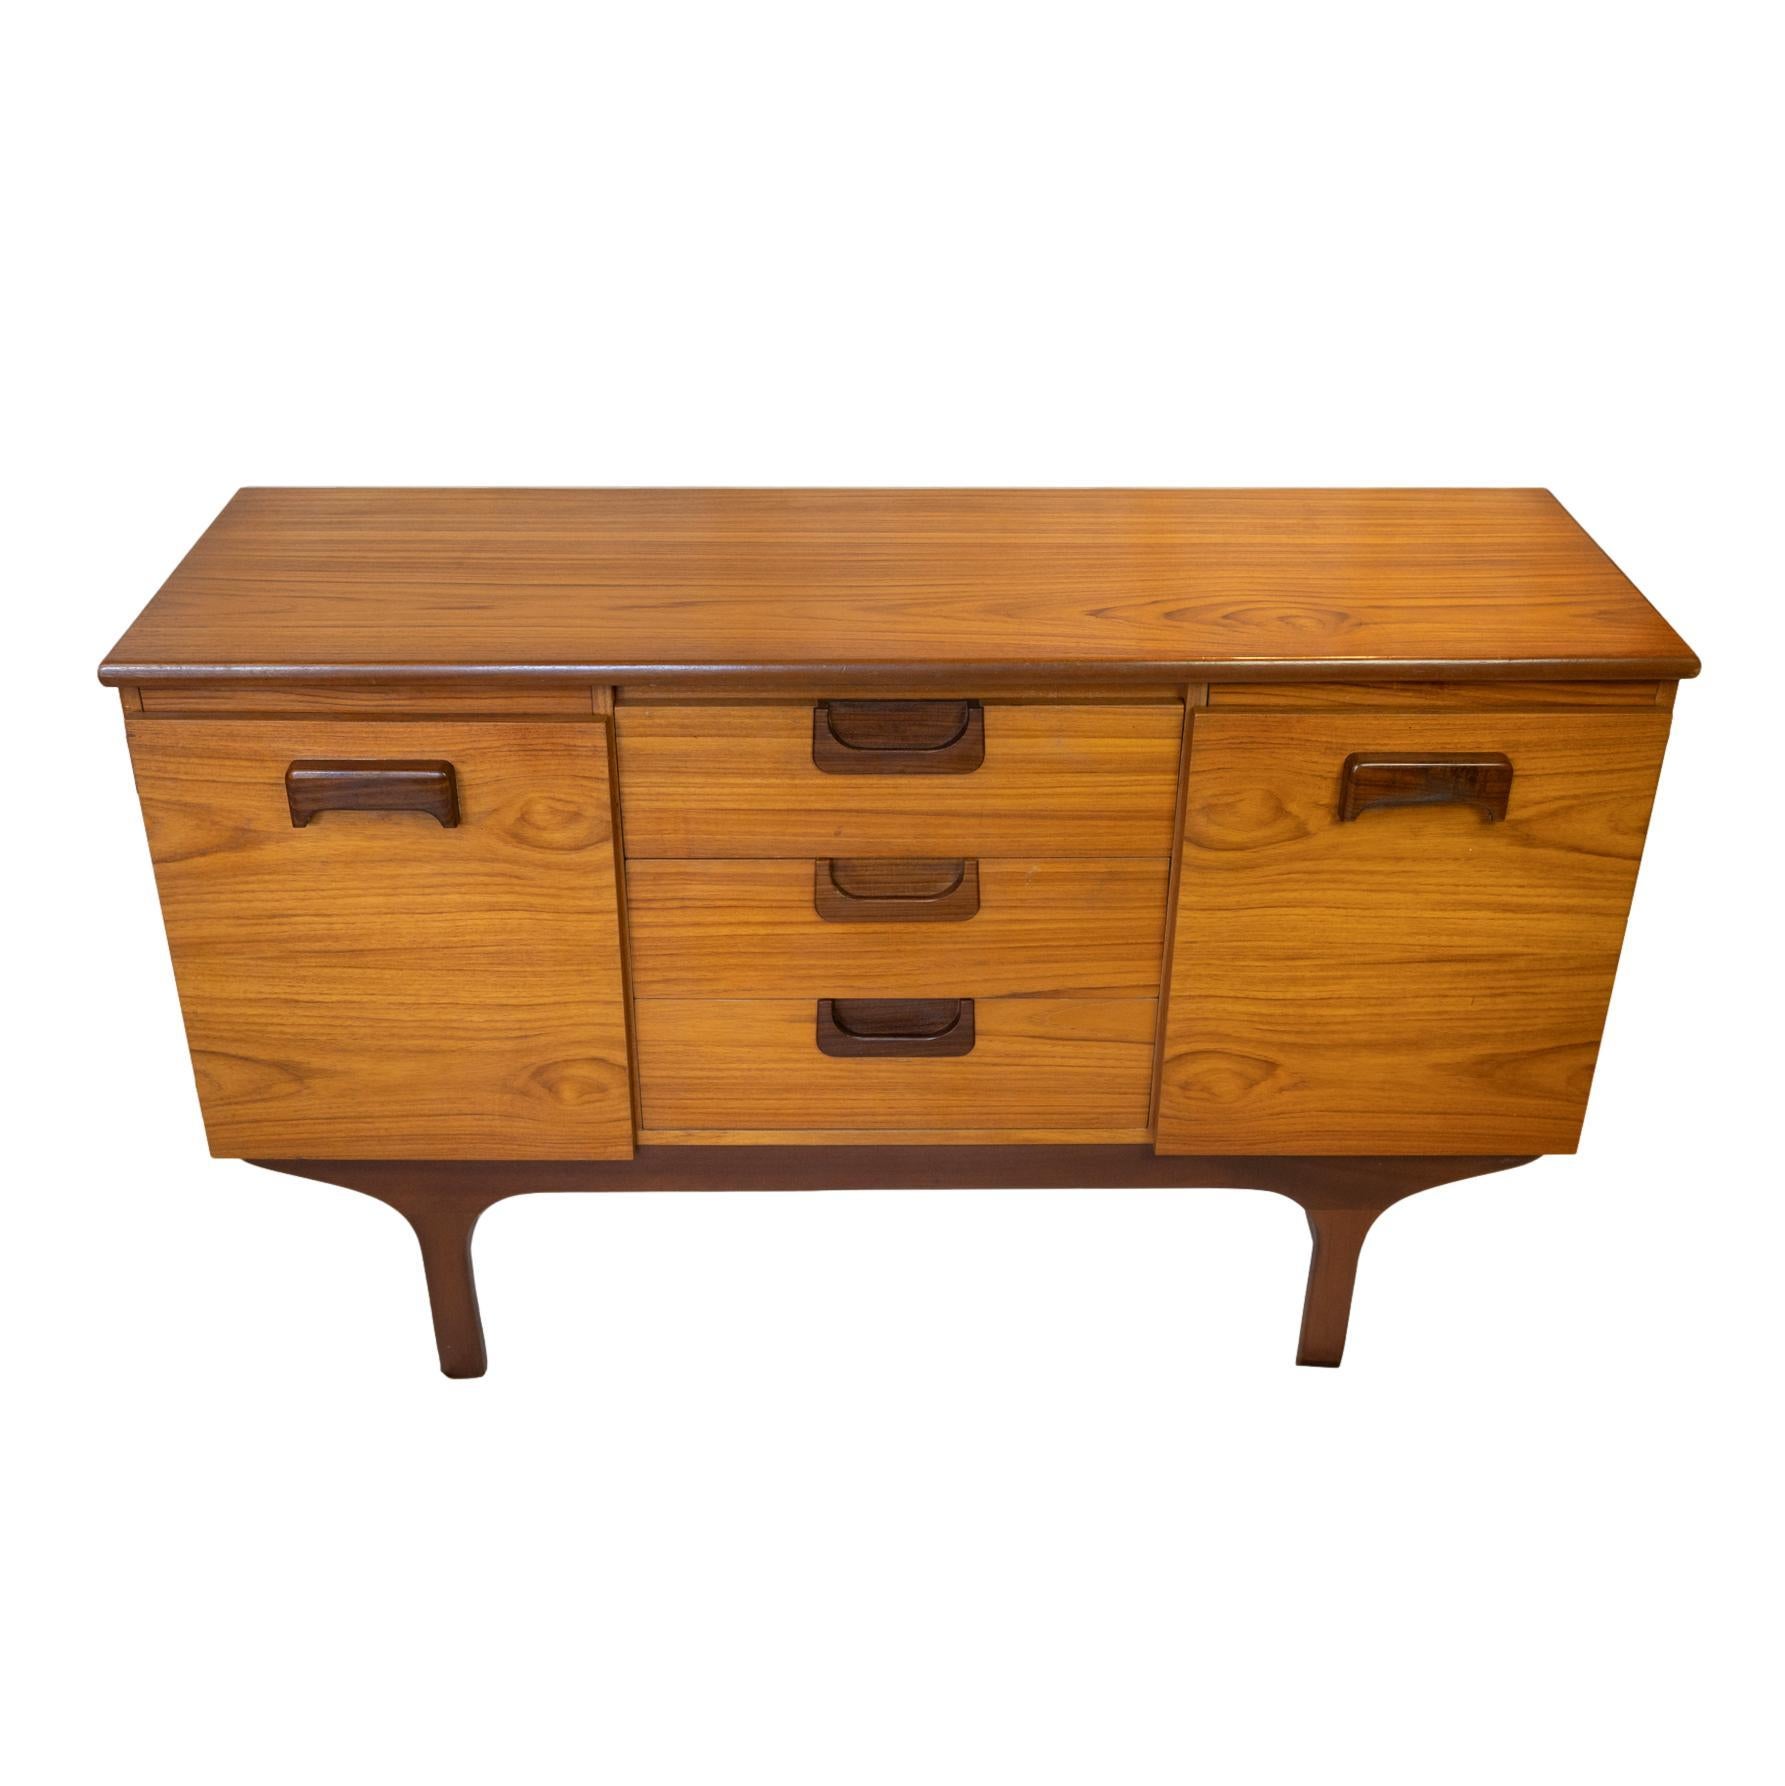 Mid-Century Modern Teak Sideboard by G-Plan, English, circa 1965, the grain-matched case with three central drawers, one fitted for cutlery, with cabinet doors to either side, all with molded sculptural handles, on Danish Modern legs. The top